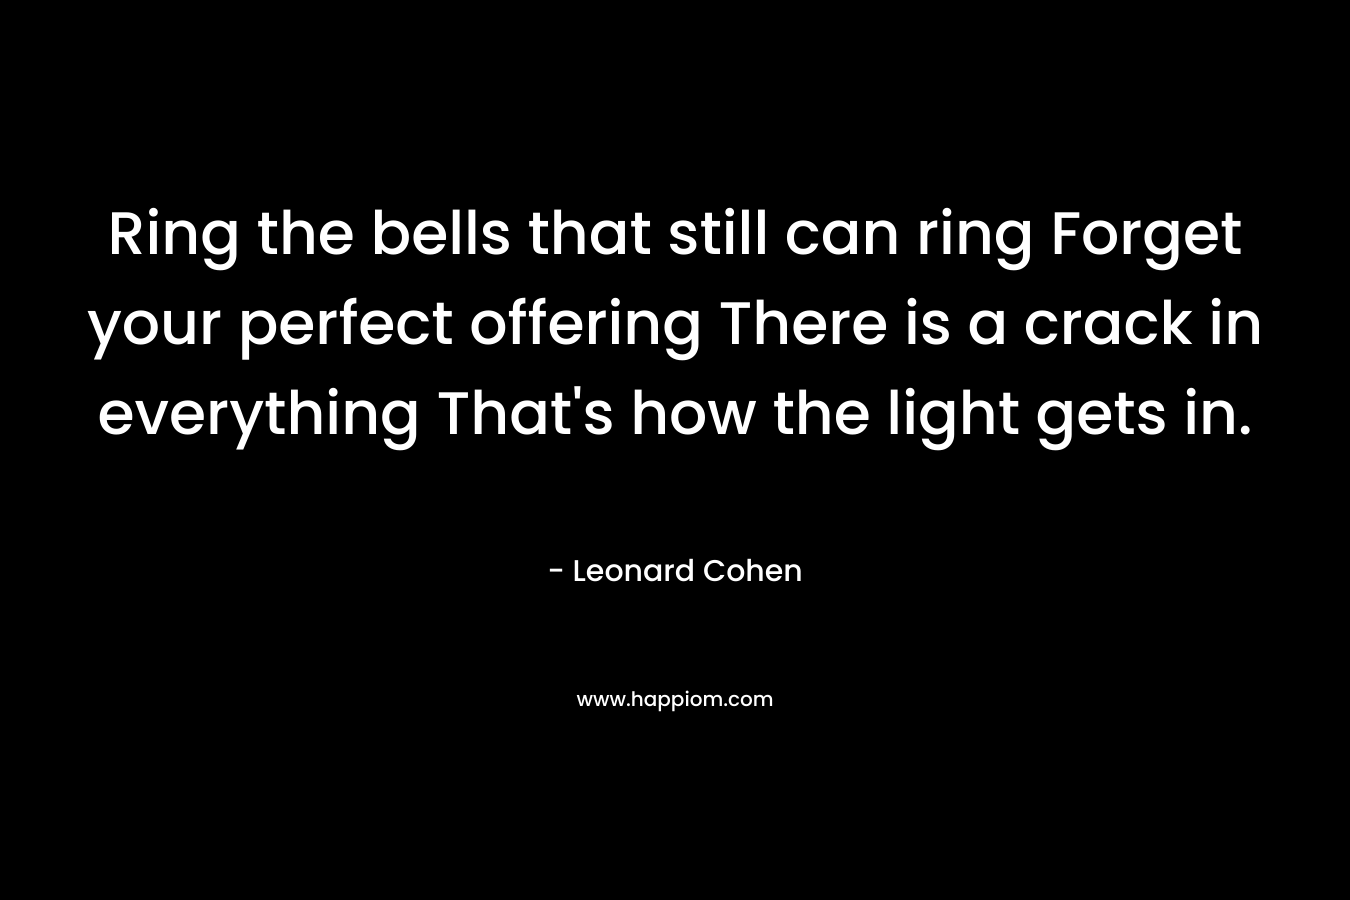 Ring the bells that still can ring Forget your perfect offering There is a crack in everything That’s how the light gets in. – Leonard Cohen